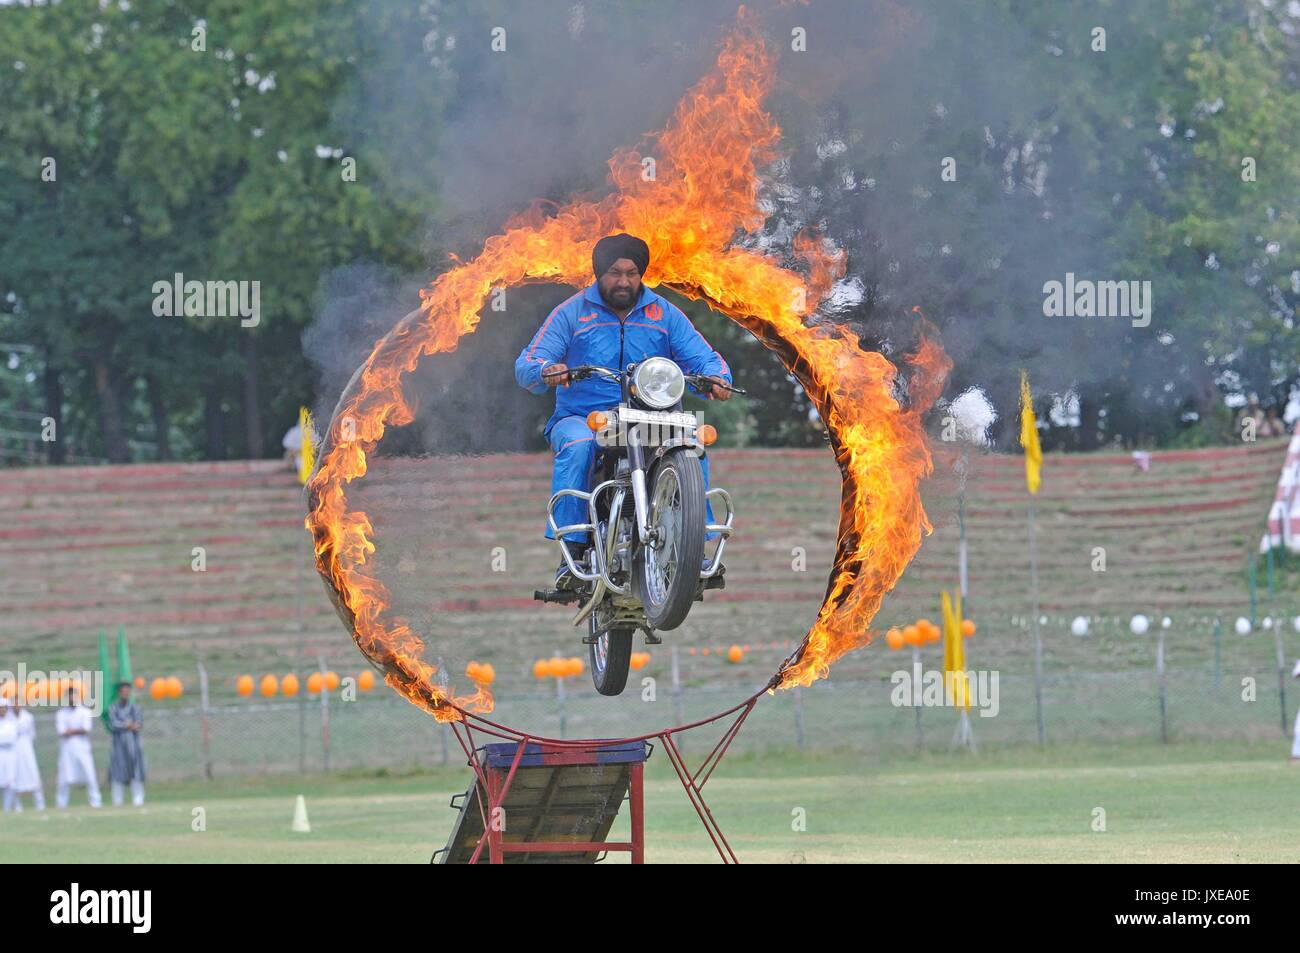 Srinagar, Kashmir. 15th Aug, 2017.A member of the police of motorcycle dare devil team performs a stunt on the occasion of 71st Independence Day Celebrations, on August 15, 2017 in Srinagar, Kashmir. Mufti welcomed Prime Minister Narendra Modi's remarks that separatism in Jammu and Kashmir will be defeated by embracing Kashmiris and not by violence. Credit: Newscom/Alamy Live News Stock Photo